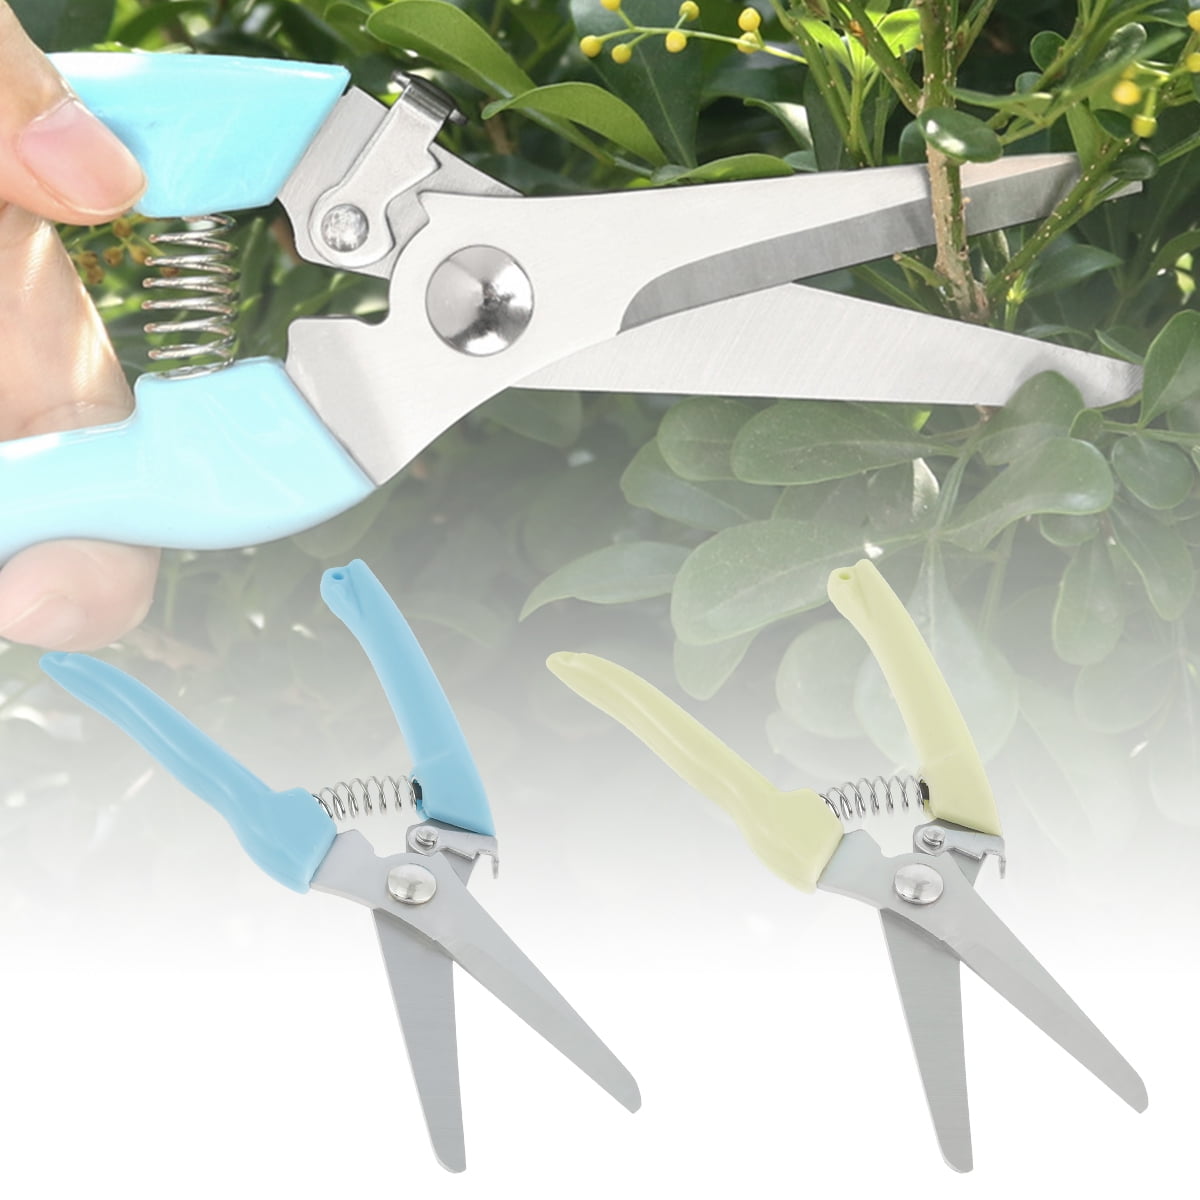 Trimming Pruning Scissors Stainless Steel For Gardening and Plants New 